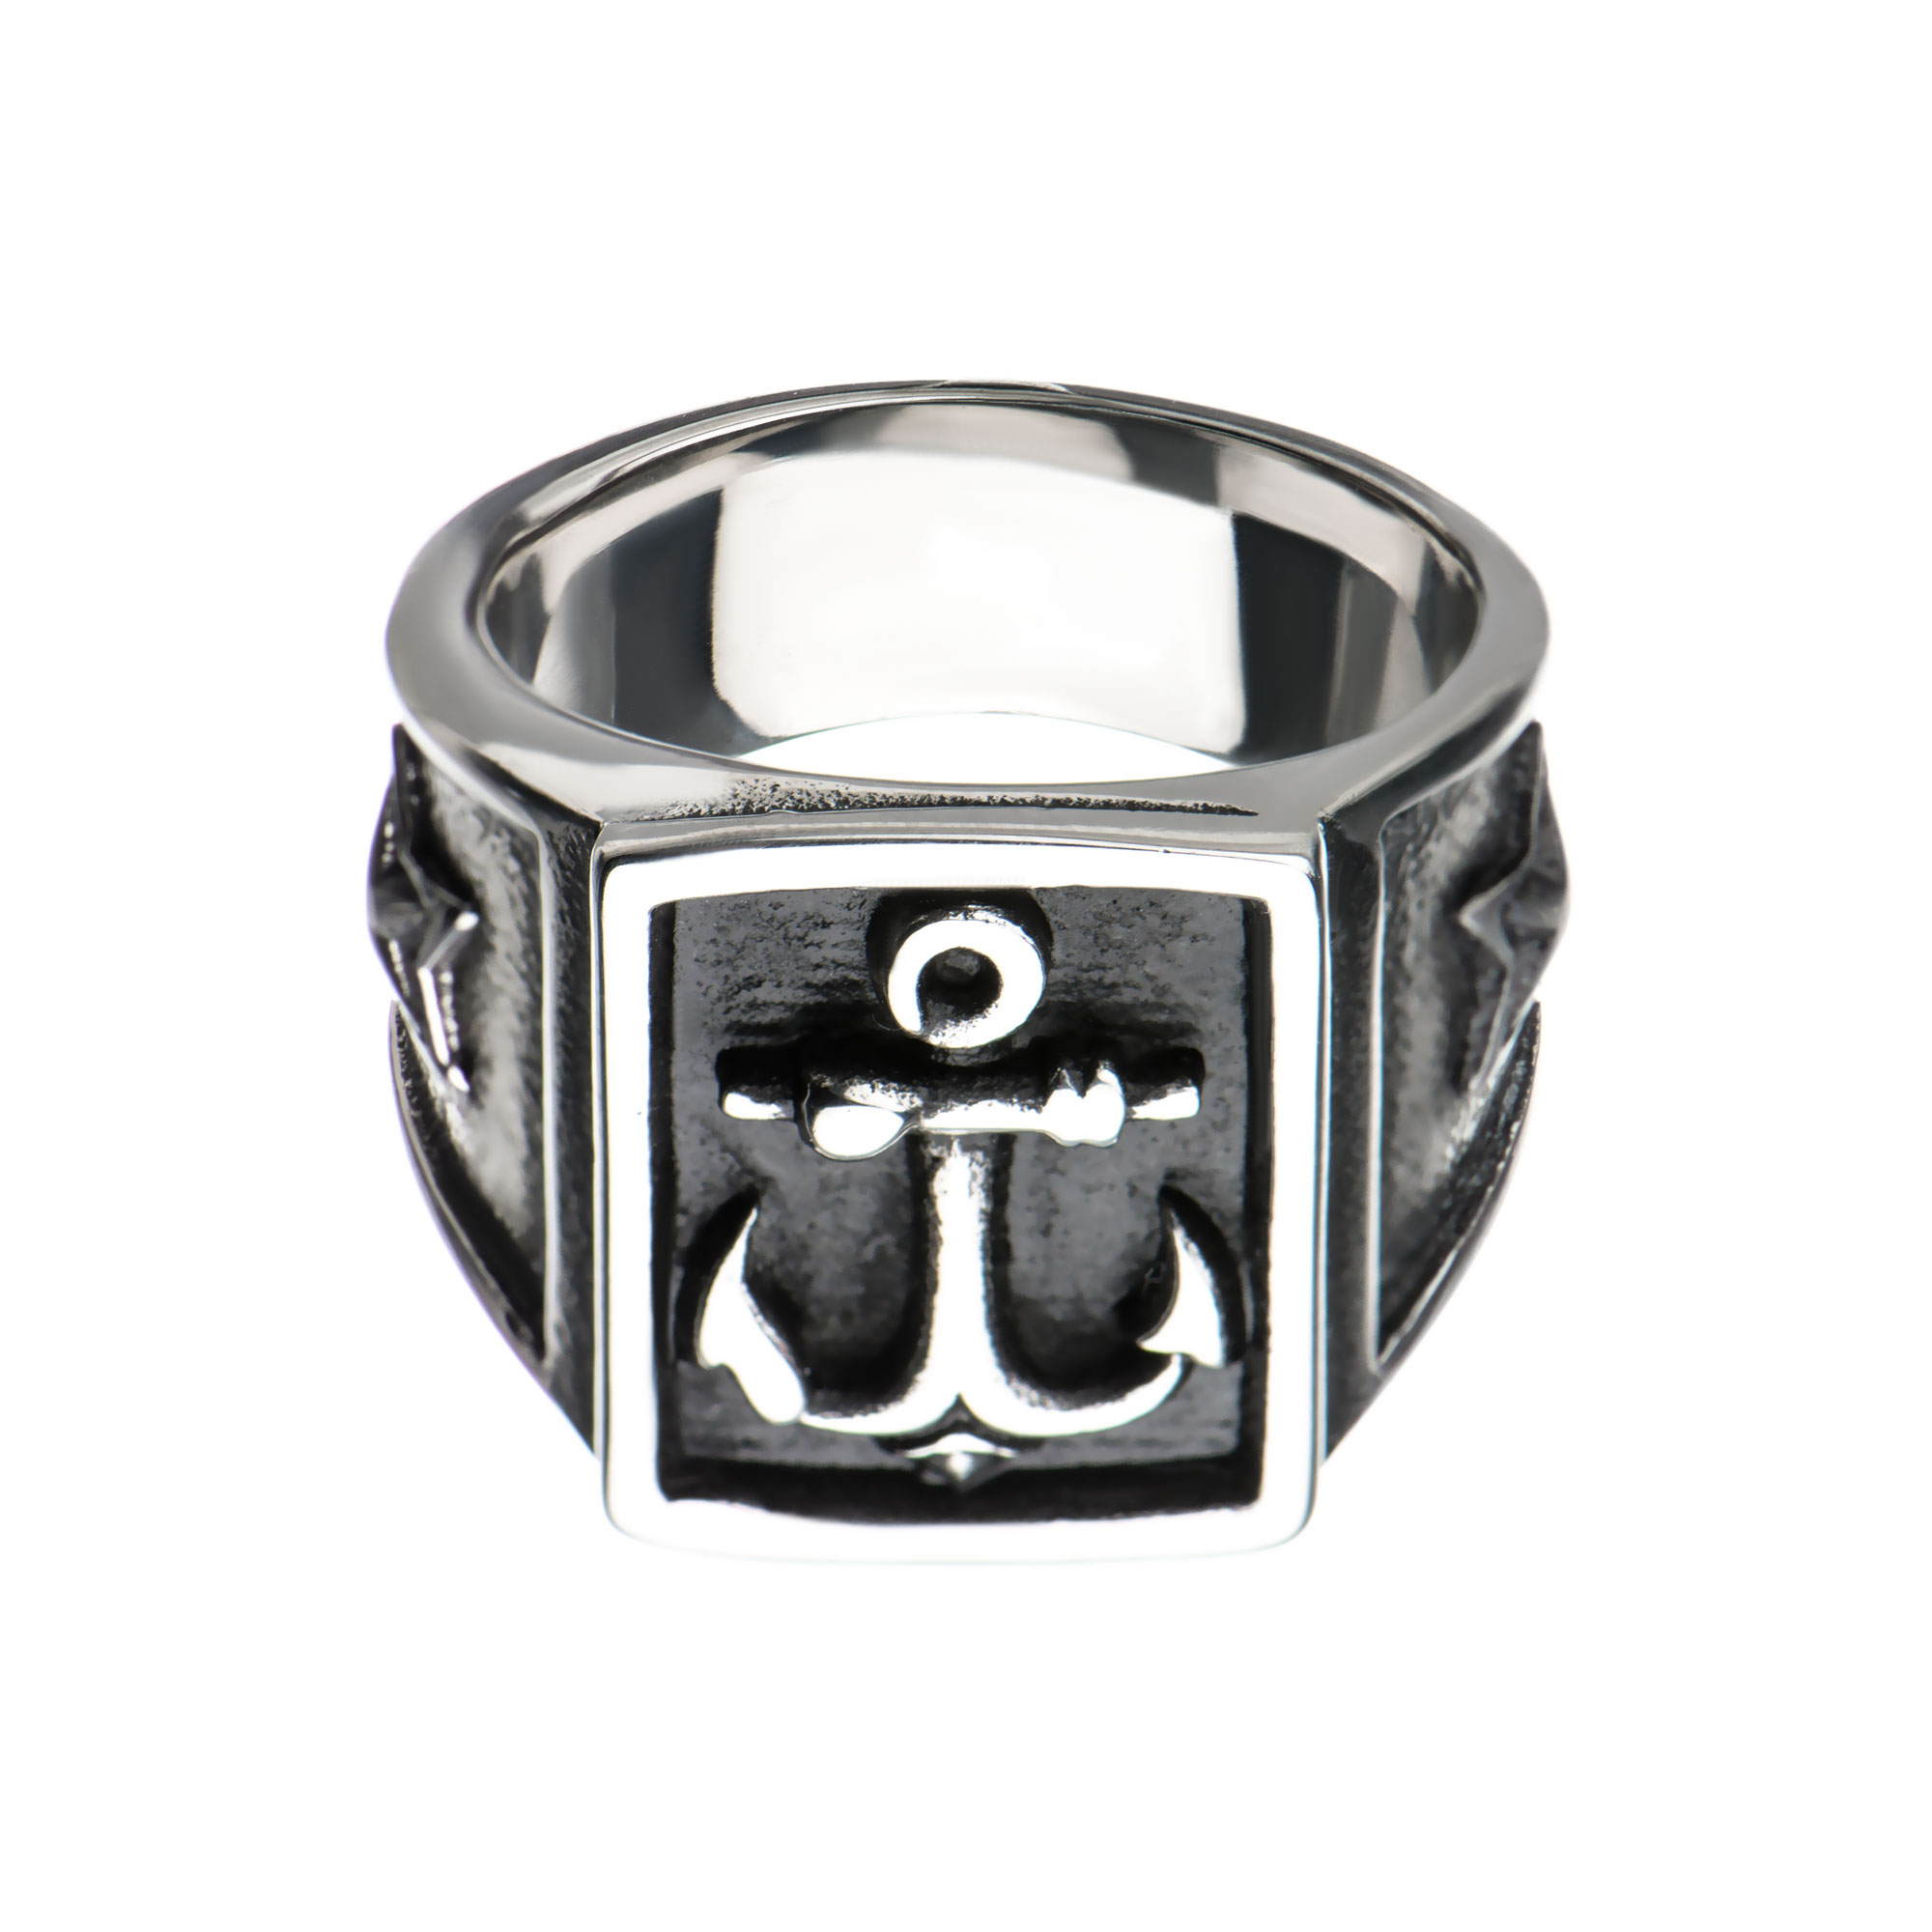 Steel & Black Plated Oxidized Anchor Signet Ring Image 2 Morin Jewelers Southbridge, MA